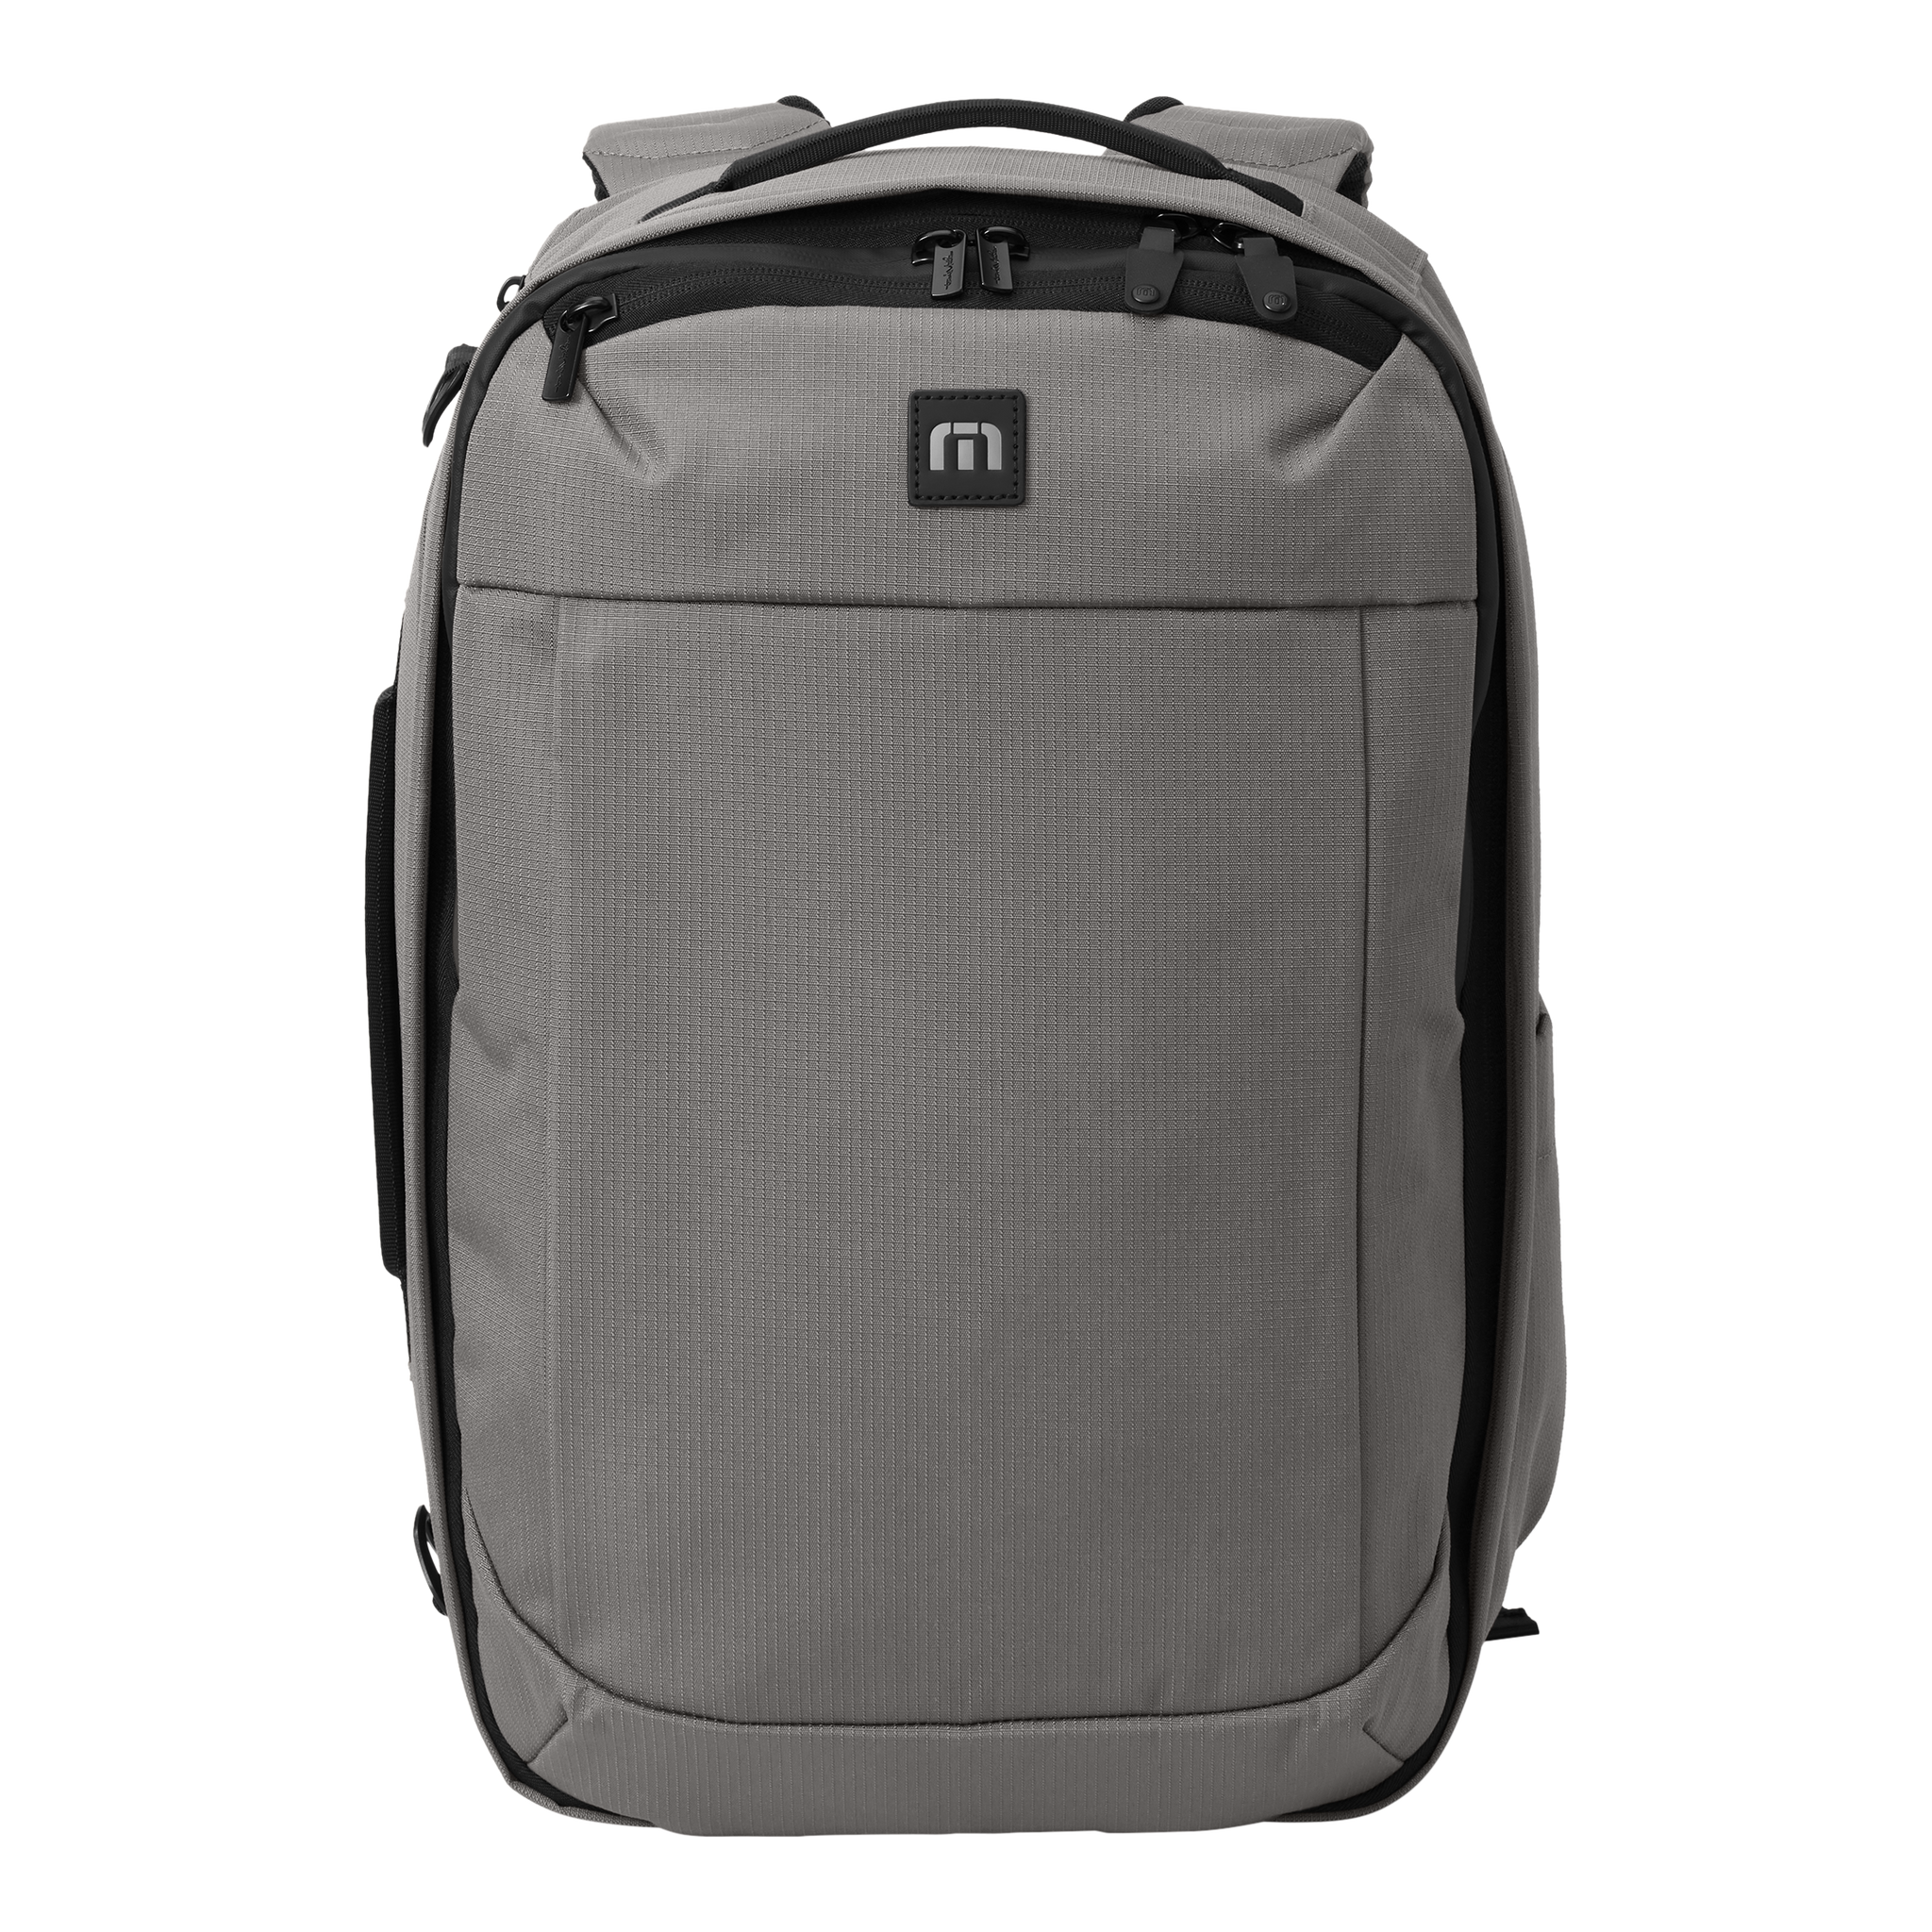 A2410 Lateral Convertible Backpack